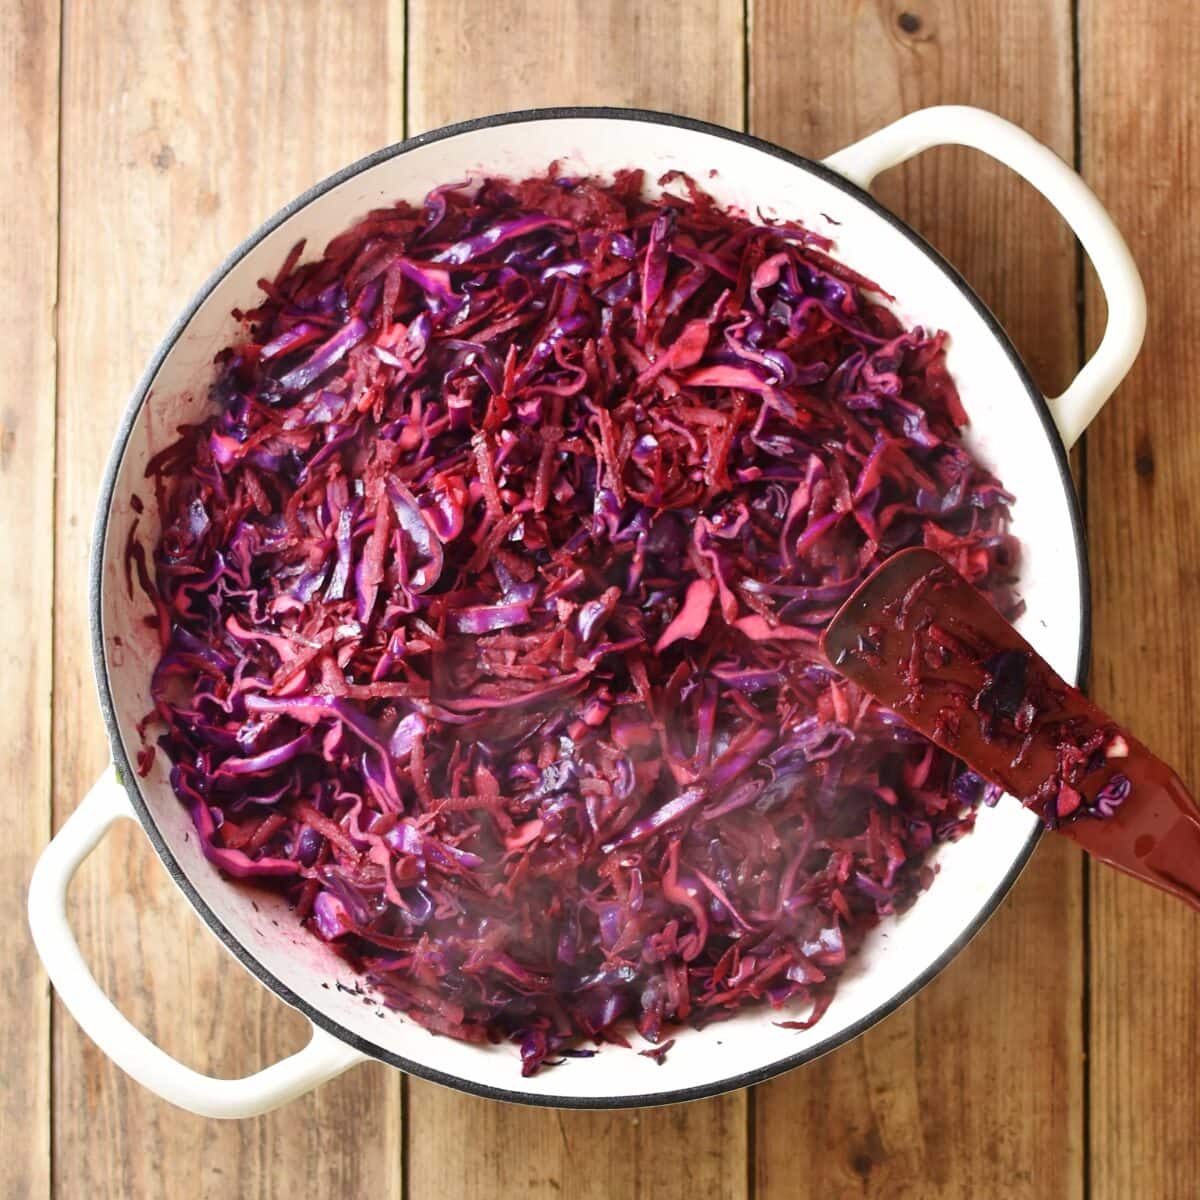 Braise shredded red cabbage with red spatula in large white pan.